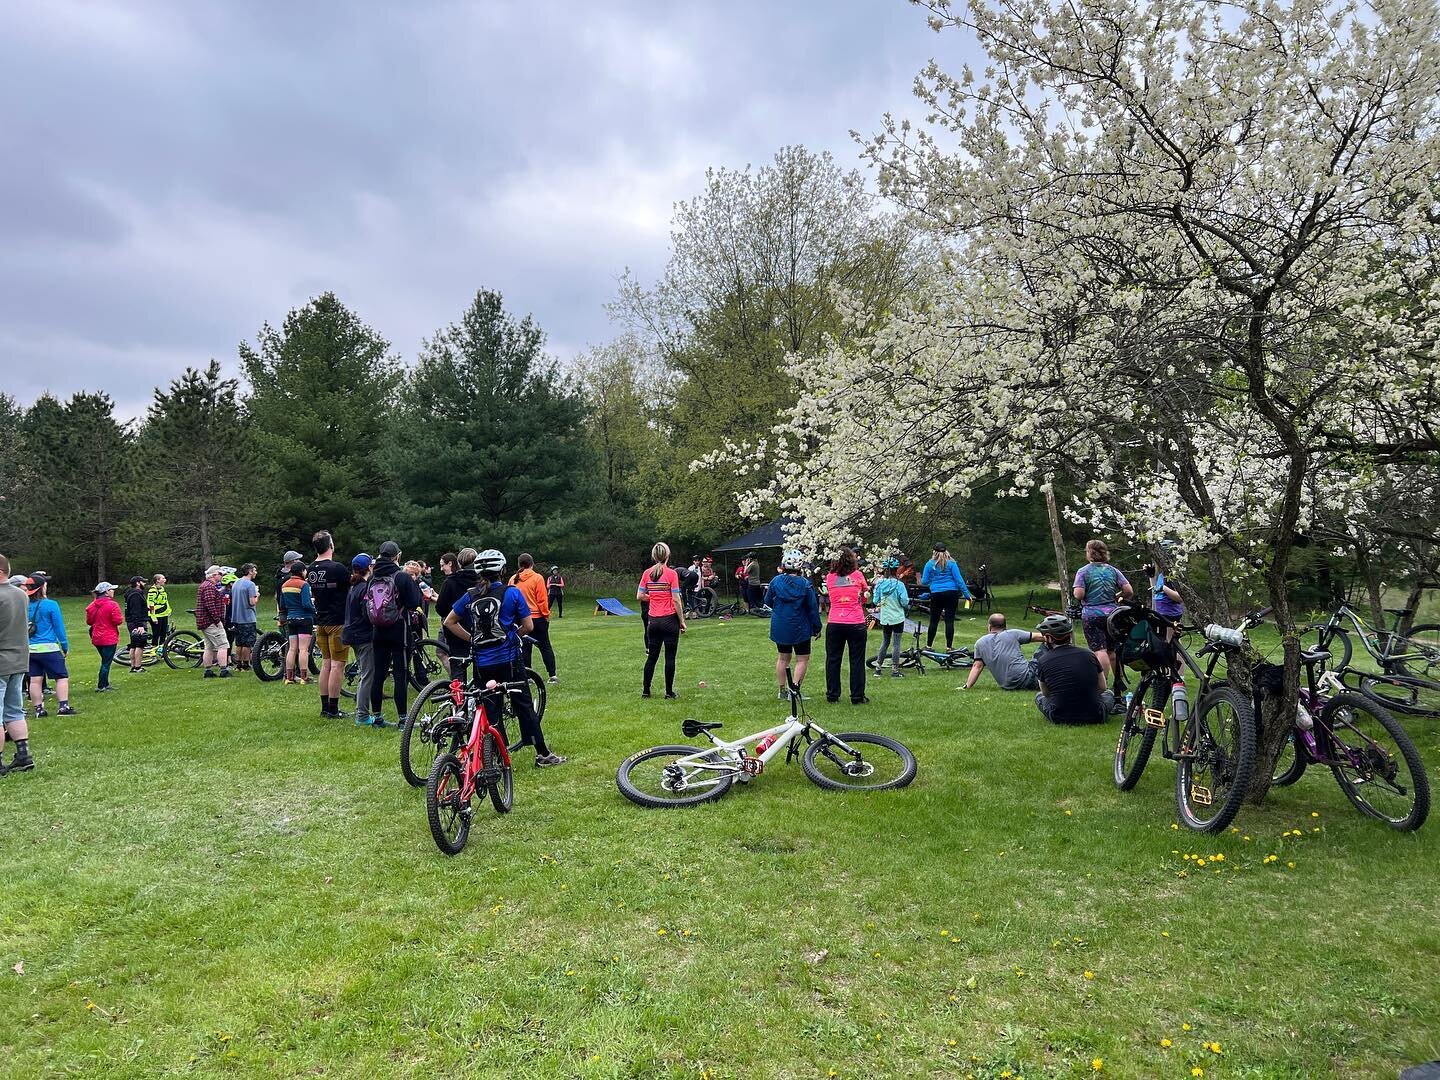 International Women&rsquo;s MTB Day! Thanks for putting this together @metro_mountain_bikers Even though the day started dreary it was a perfect day to be in the woods!
#internationalwomensmtbday #southernkettlemoraine #skorr